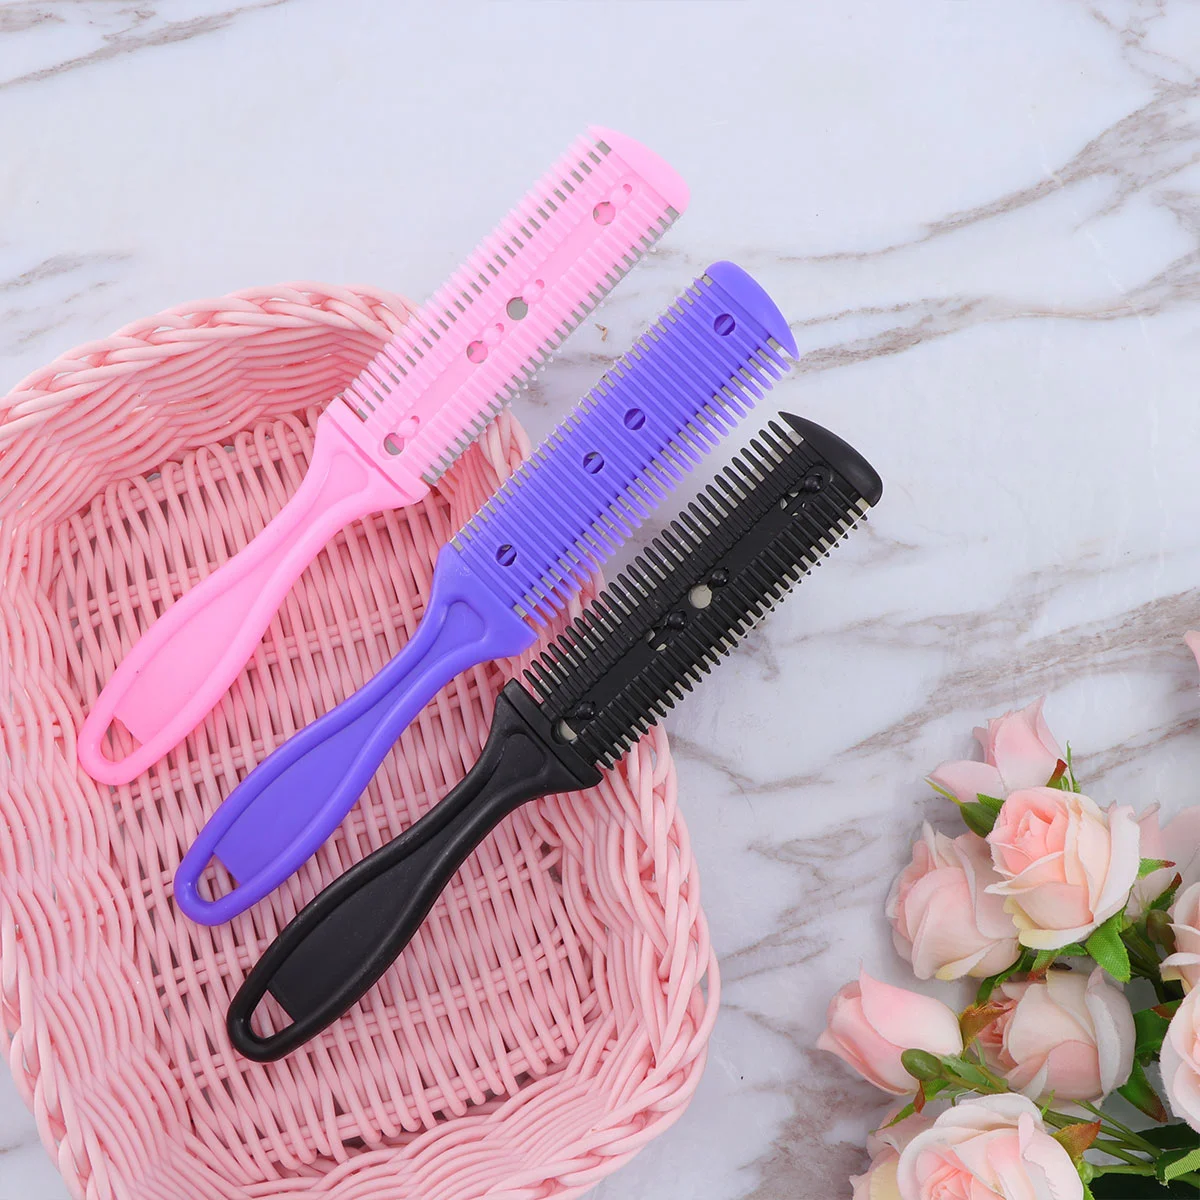 

Hair Comb Scissors Shaper Cutting Trimmer Ends Styling Trimming Side Haircut Double Shears Thinning Thinner Thick